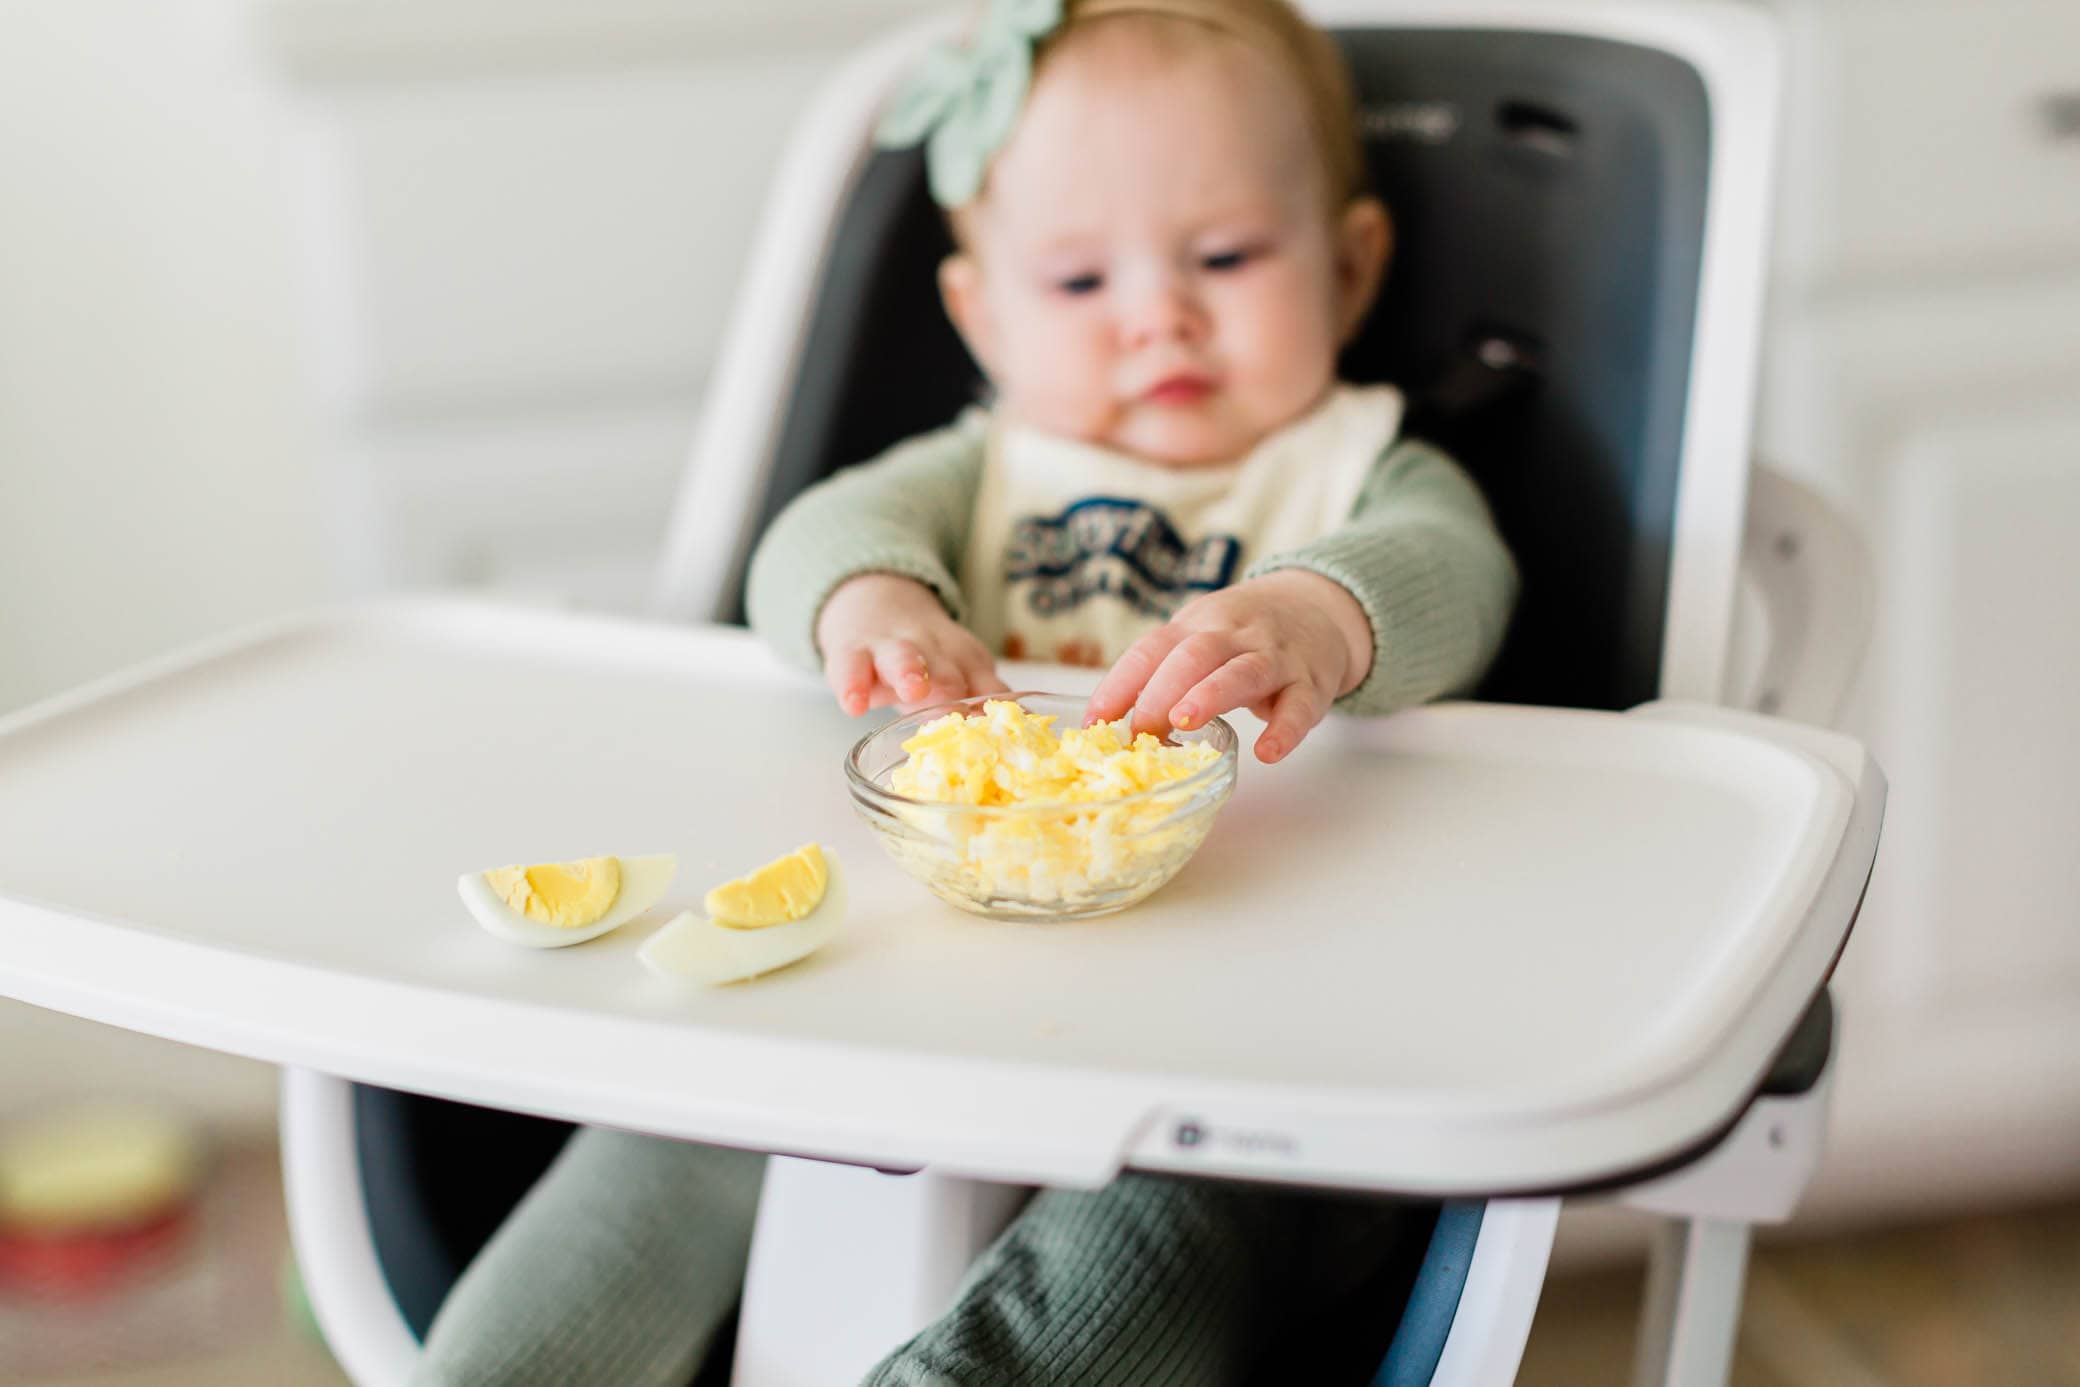 Baby girl sitting in a highchair reaching for the scrambled eggs.